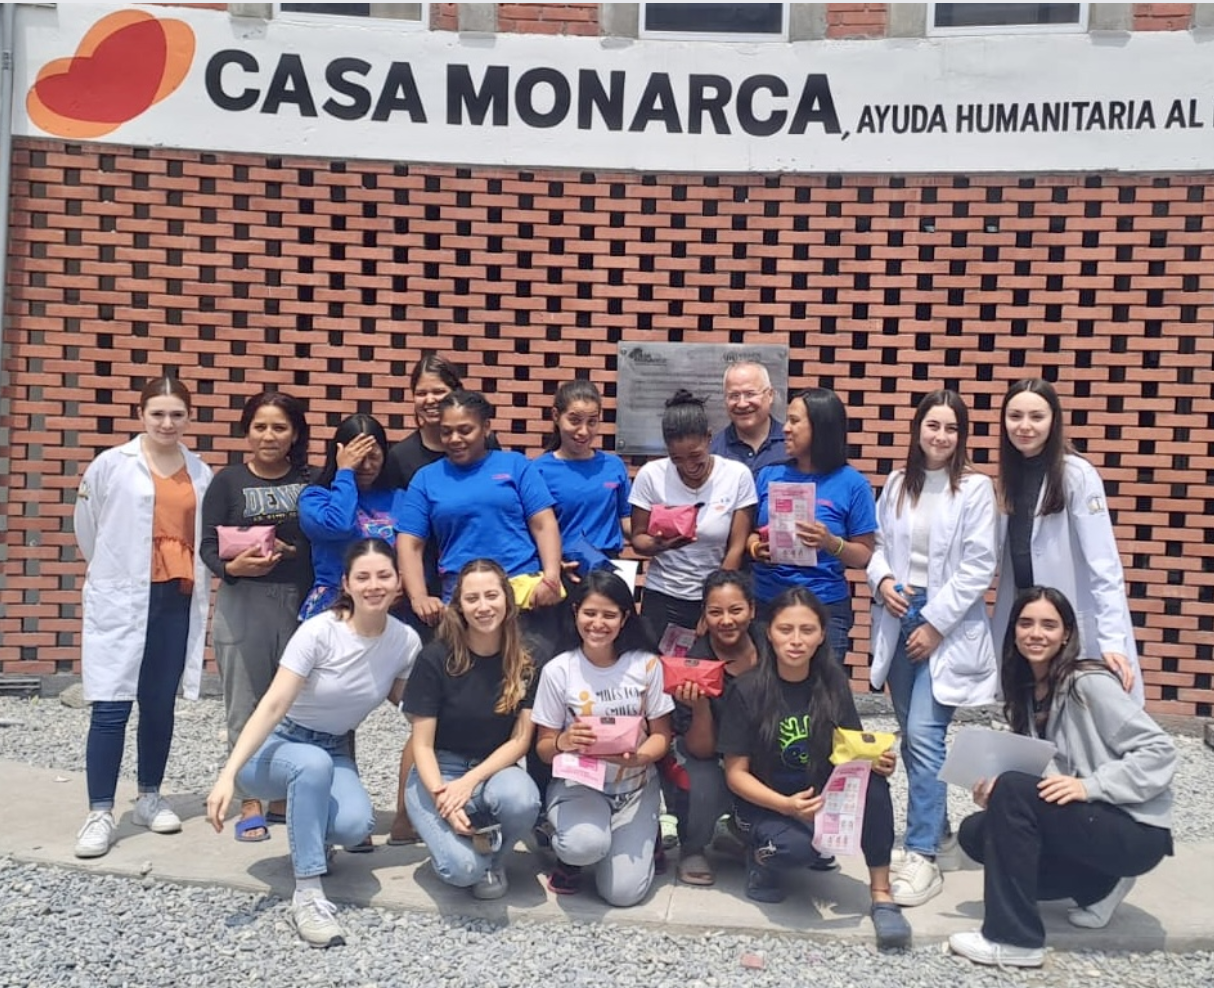 Casa Monarca: strengthening local governance migration in Mexico